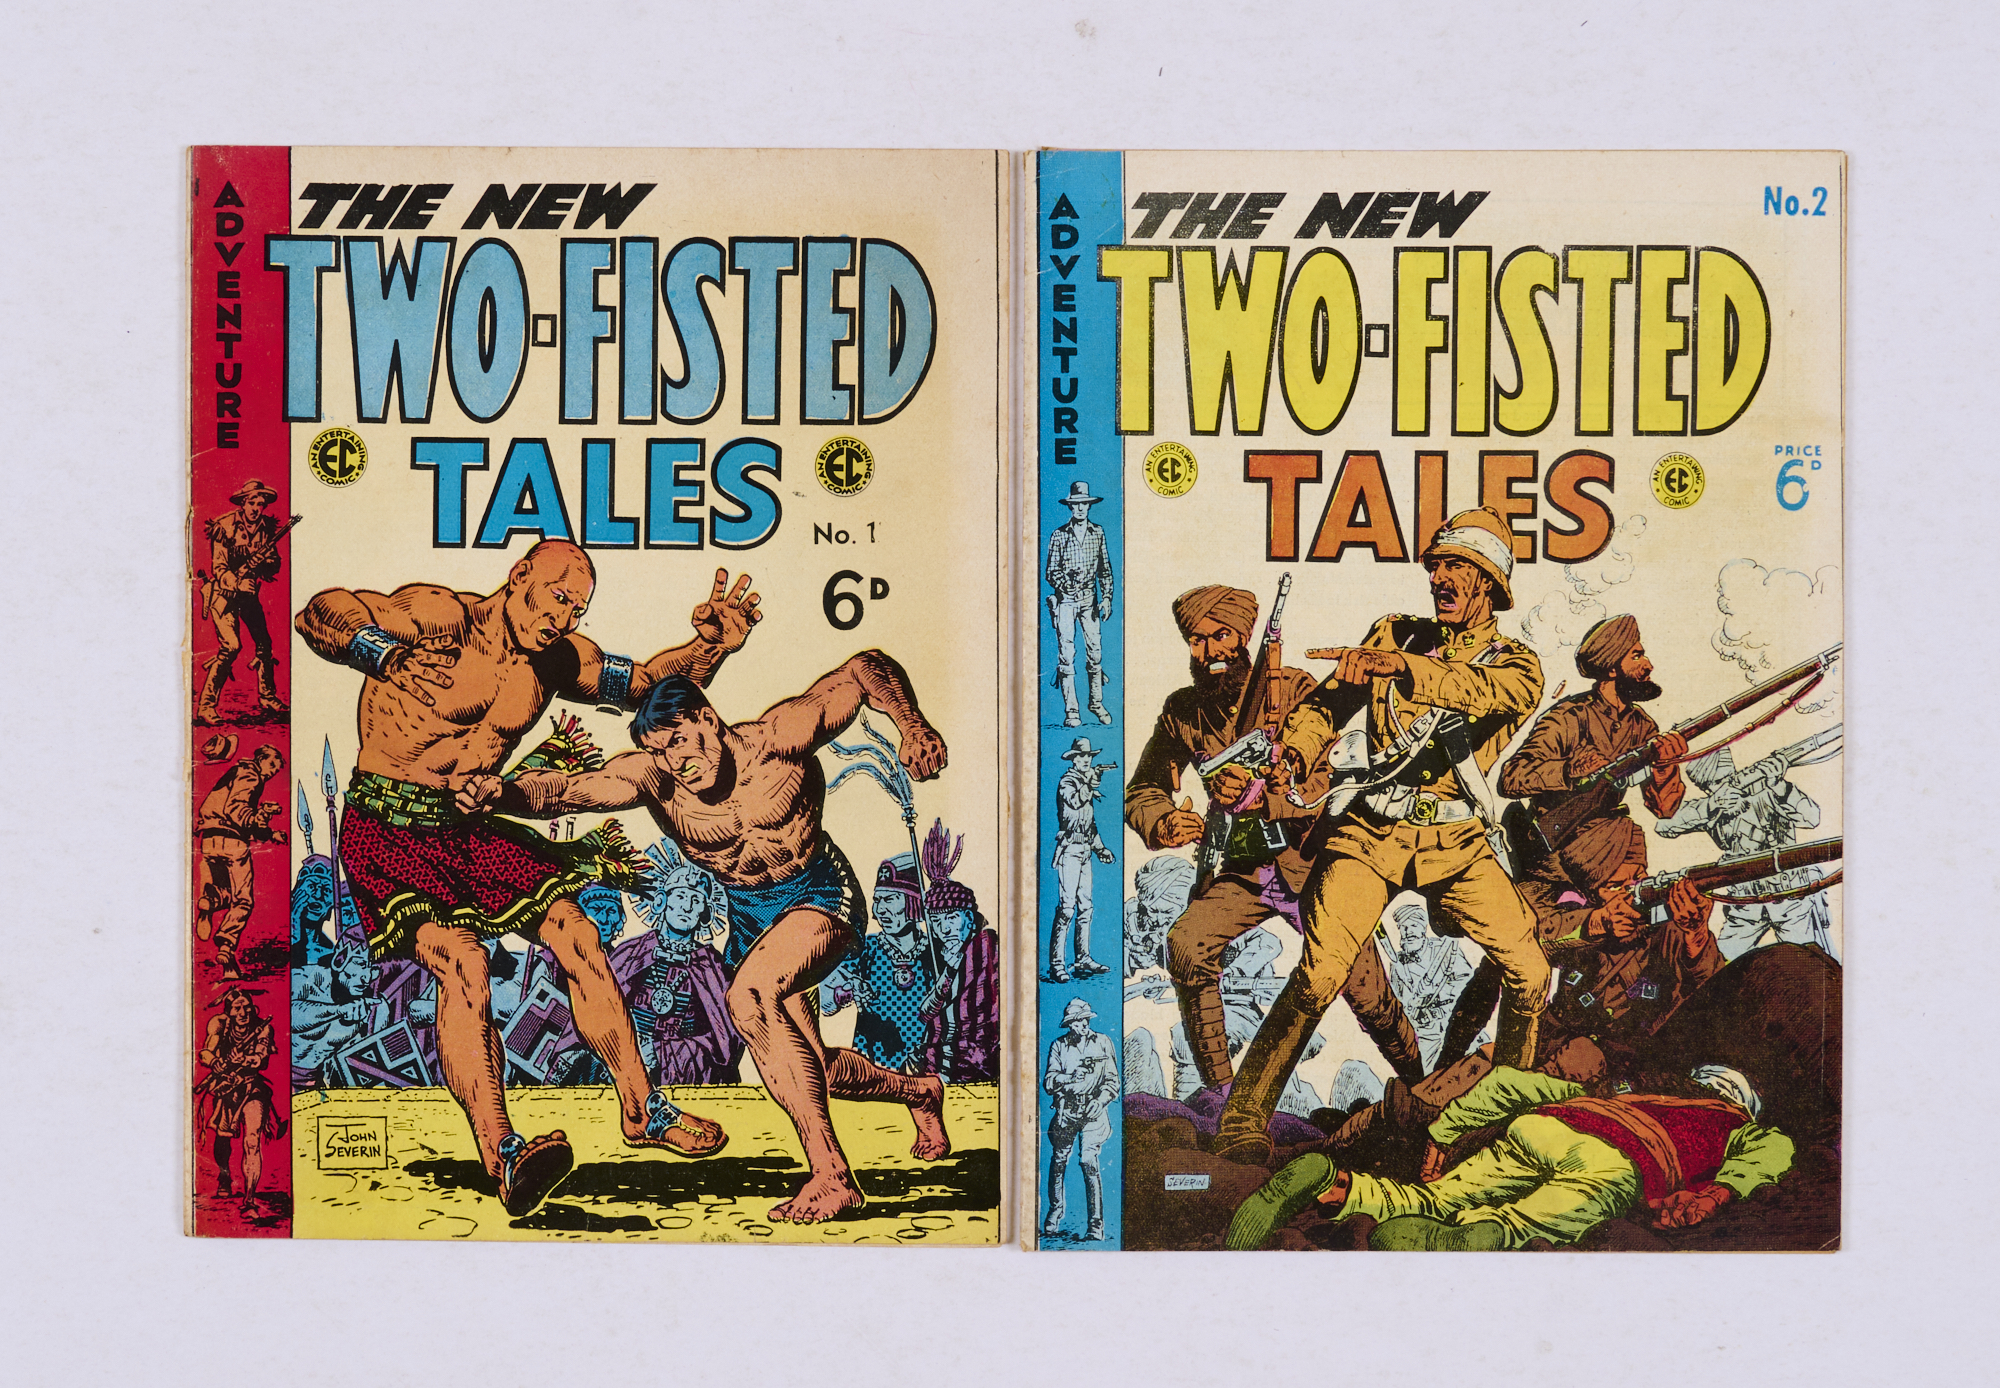 The New Two-Fisted Tales 1, 2 (Cartoon Art Productions early 1950s). Black & White reprints of U.